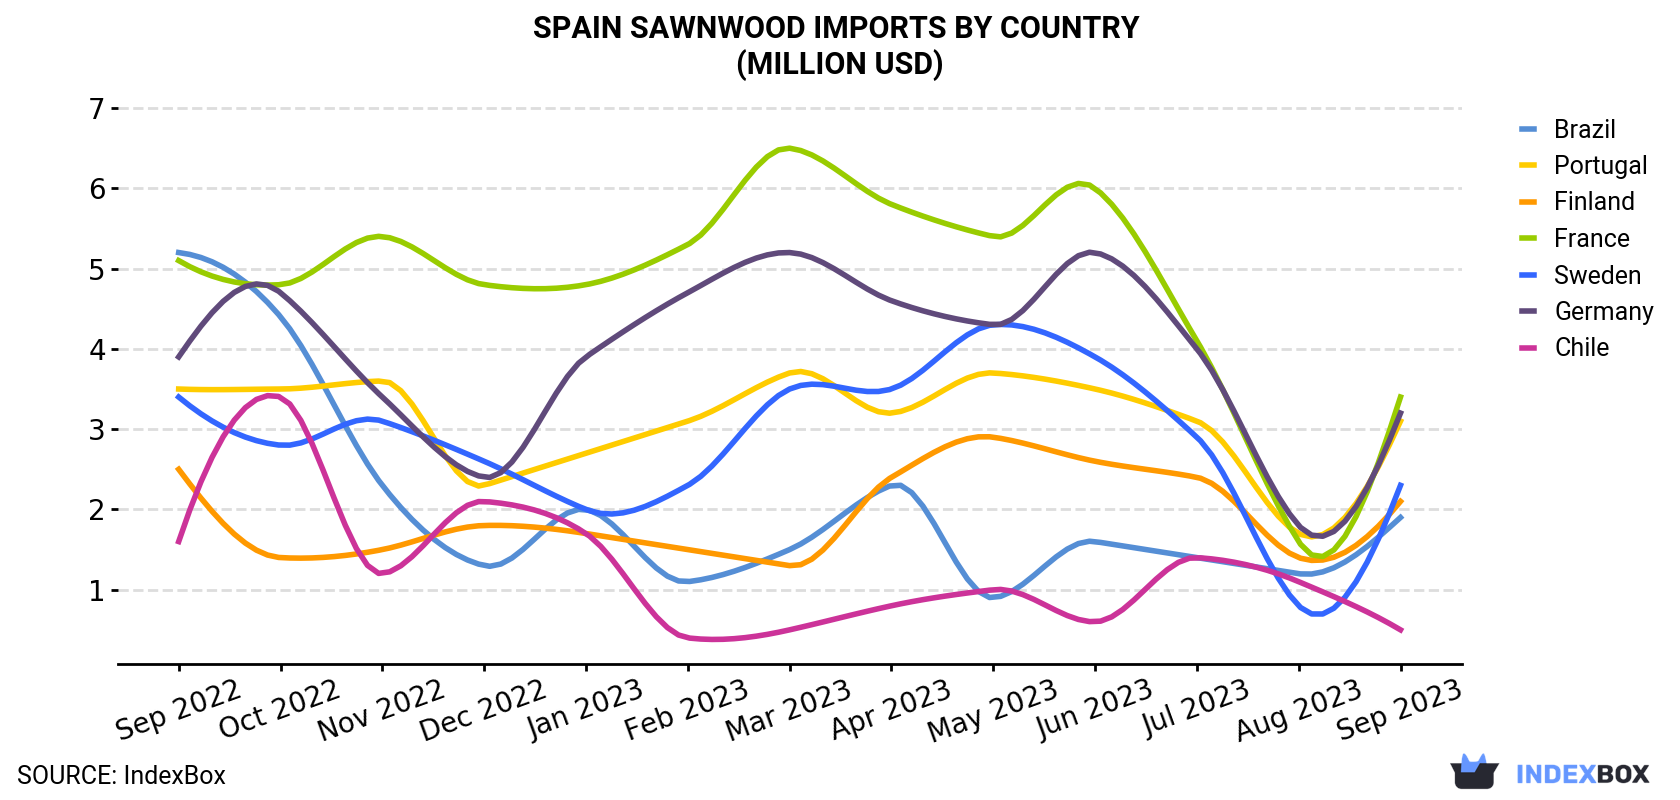 Spain Sawnwood Imports By Country (Million USD)